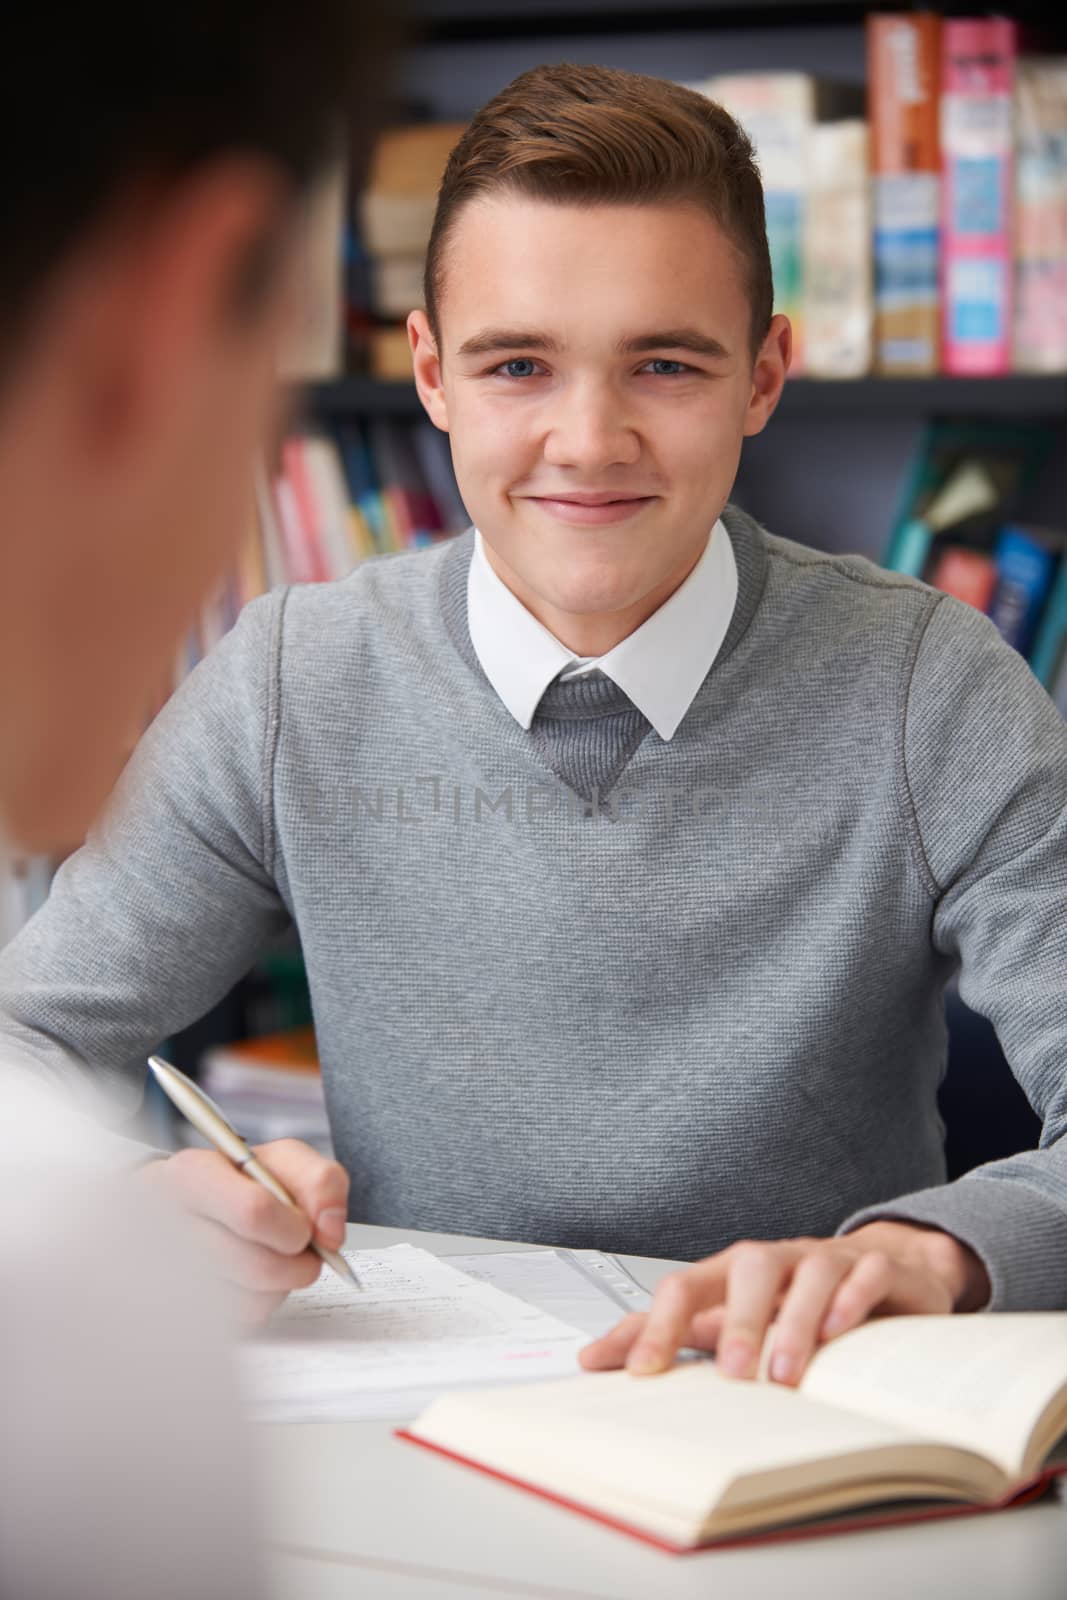 Male Teenage Student Working In Classroom